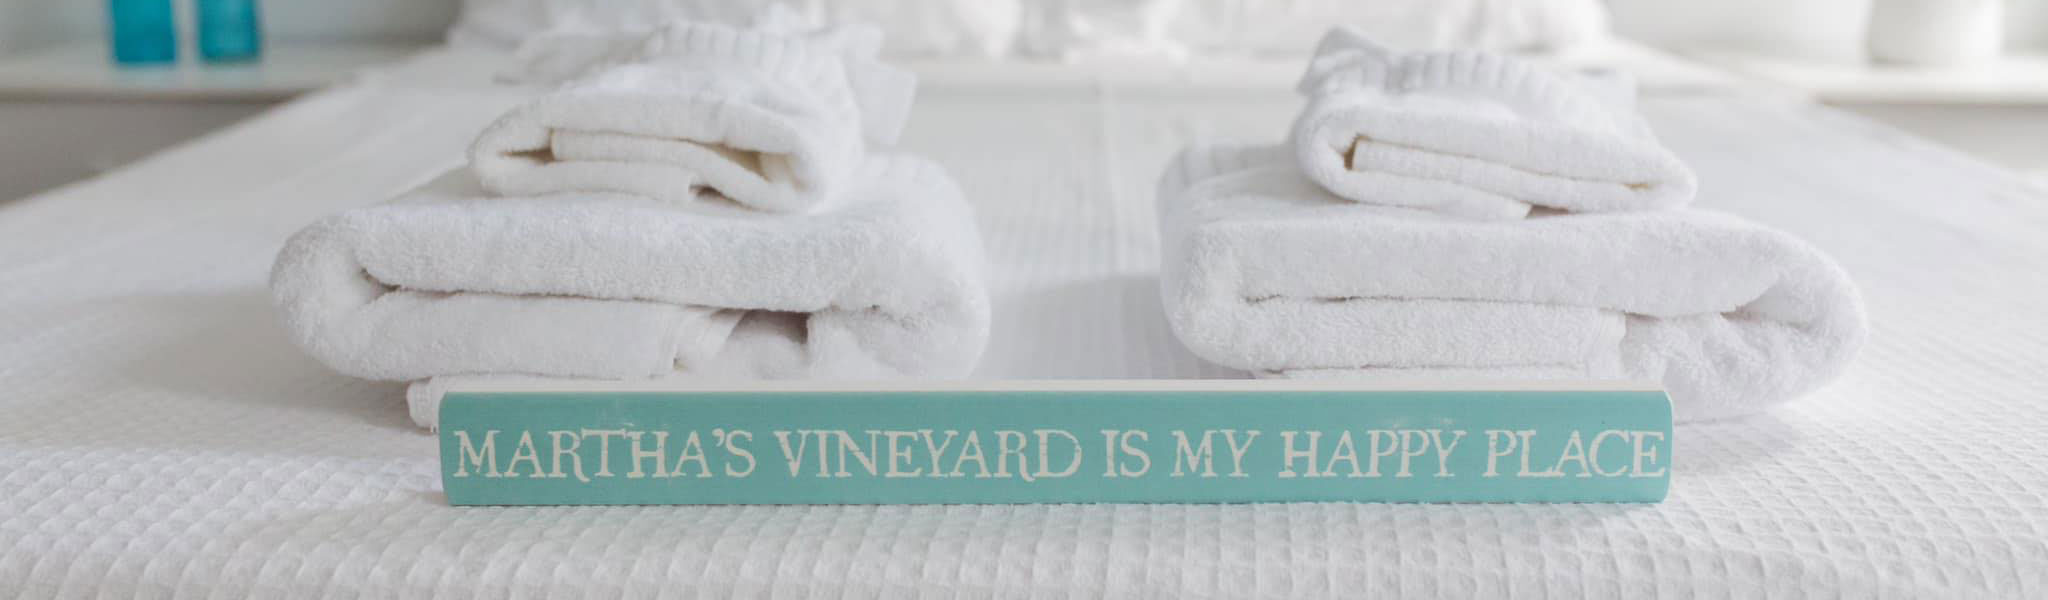 Enjoy Martha's Vineyard to the fullest, without having to worry about linens, baby equipment, beach gear, entertainment and car rental! Let Martha’s Vineyard Linen & Rentals take care of your needs 